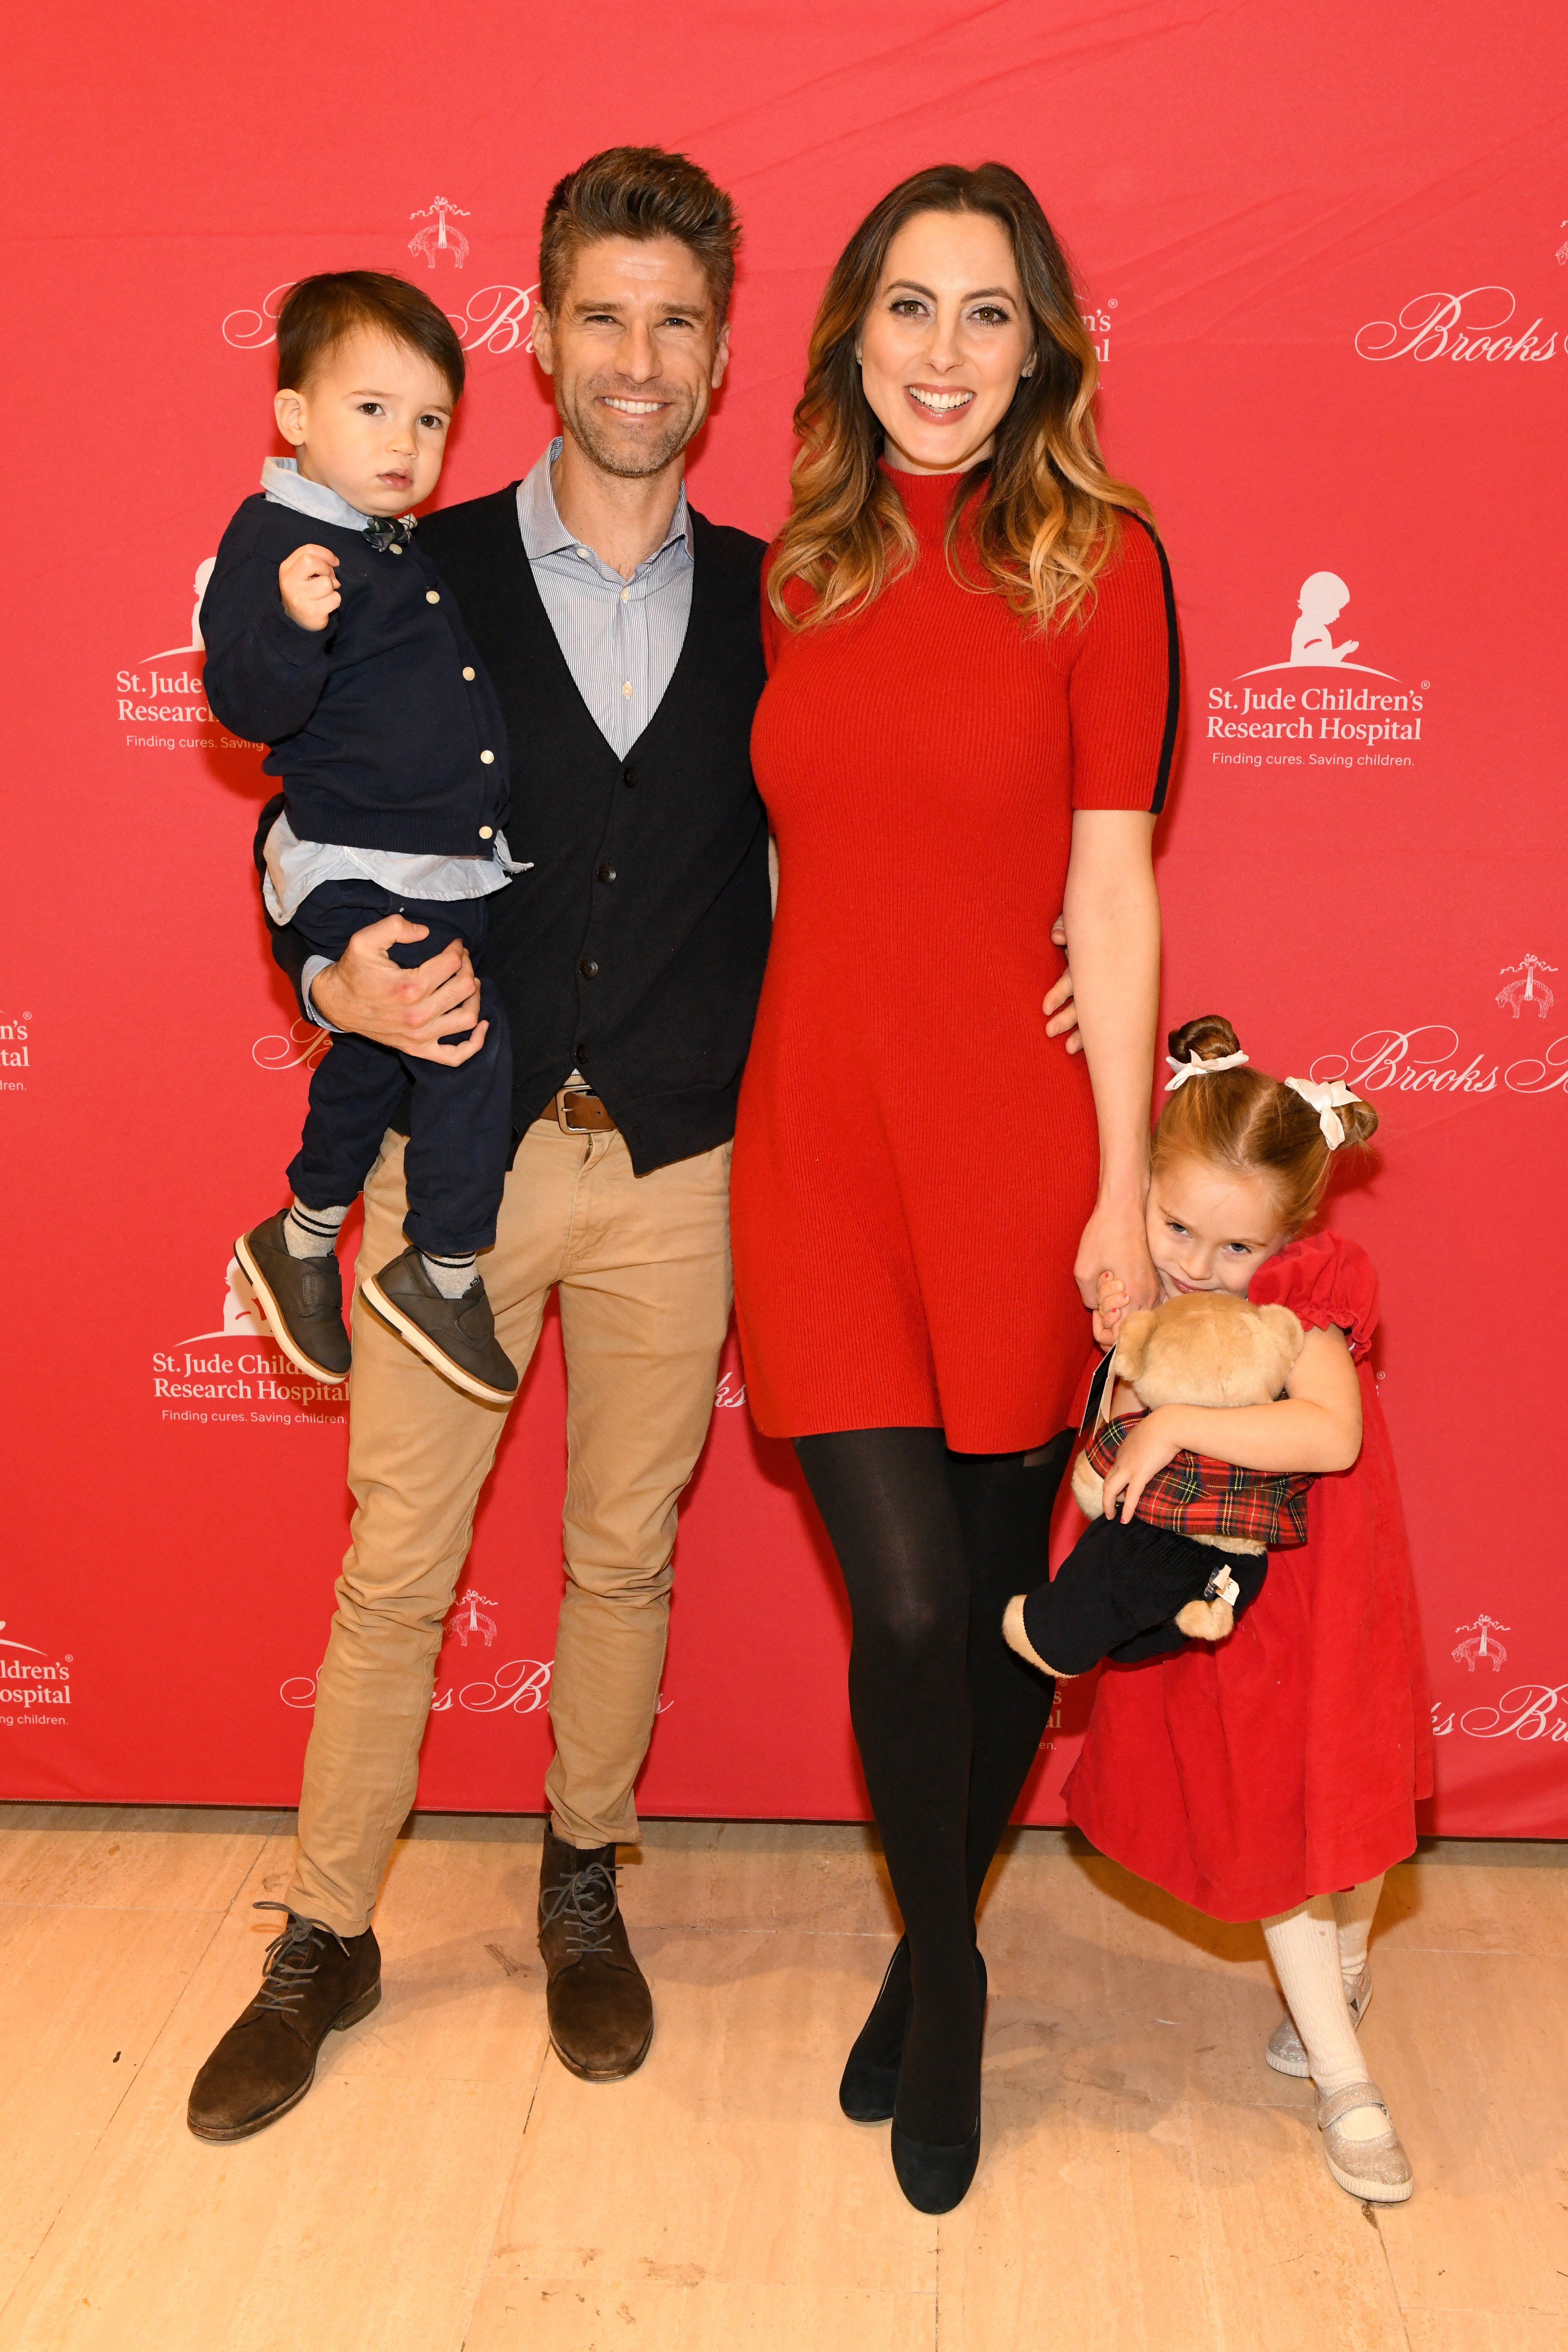 Kyle Martino and Eva Amurri Martino (C) attend the Brooks Brothers And St Jude Children's Research Hospital Annual Holiday Celebration In New York City on December 18, 2018 in New York City. | Source: Getty Images